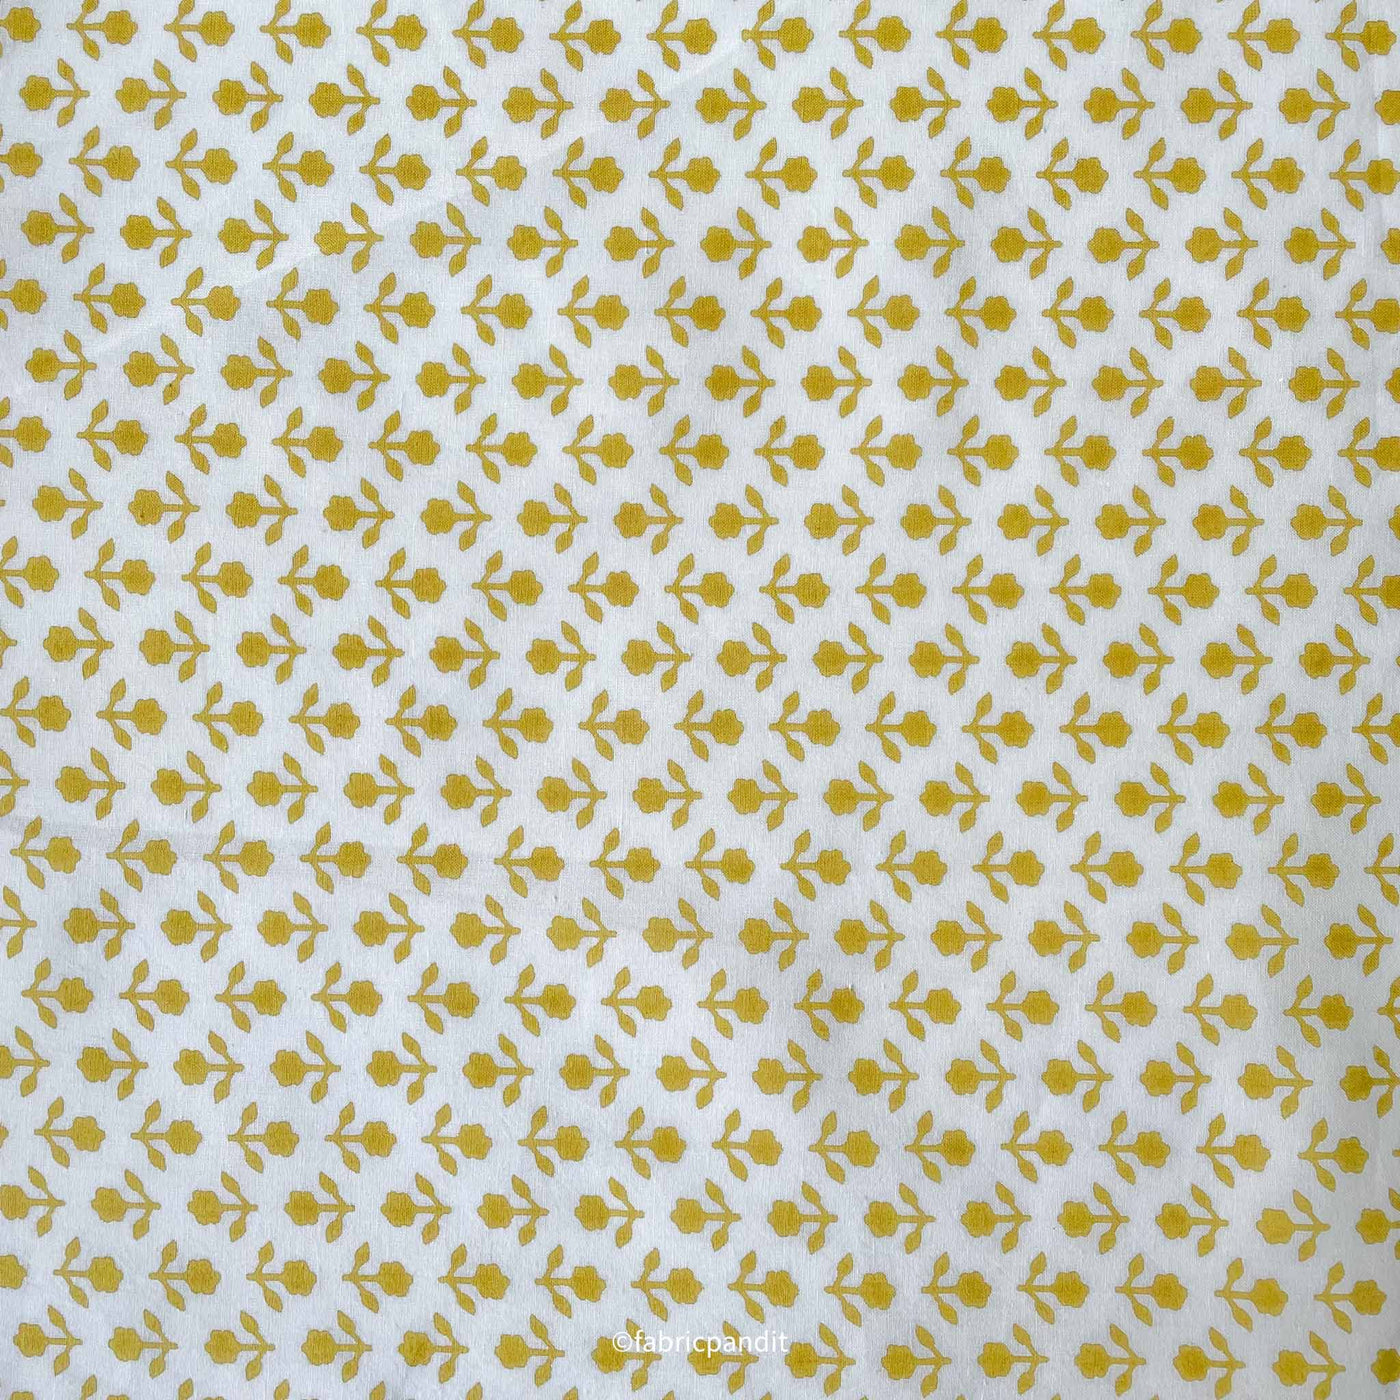 Fabric Pandit Fabric White and Dusty Yellow Mini Daisies Hand Block Printed Pure Cotton Fabric (Width 42 Inches)